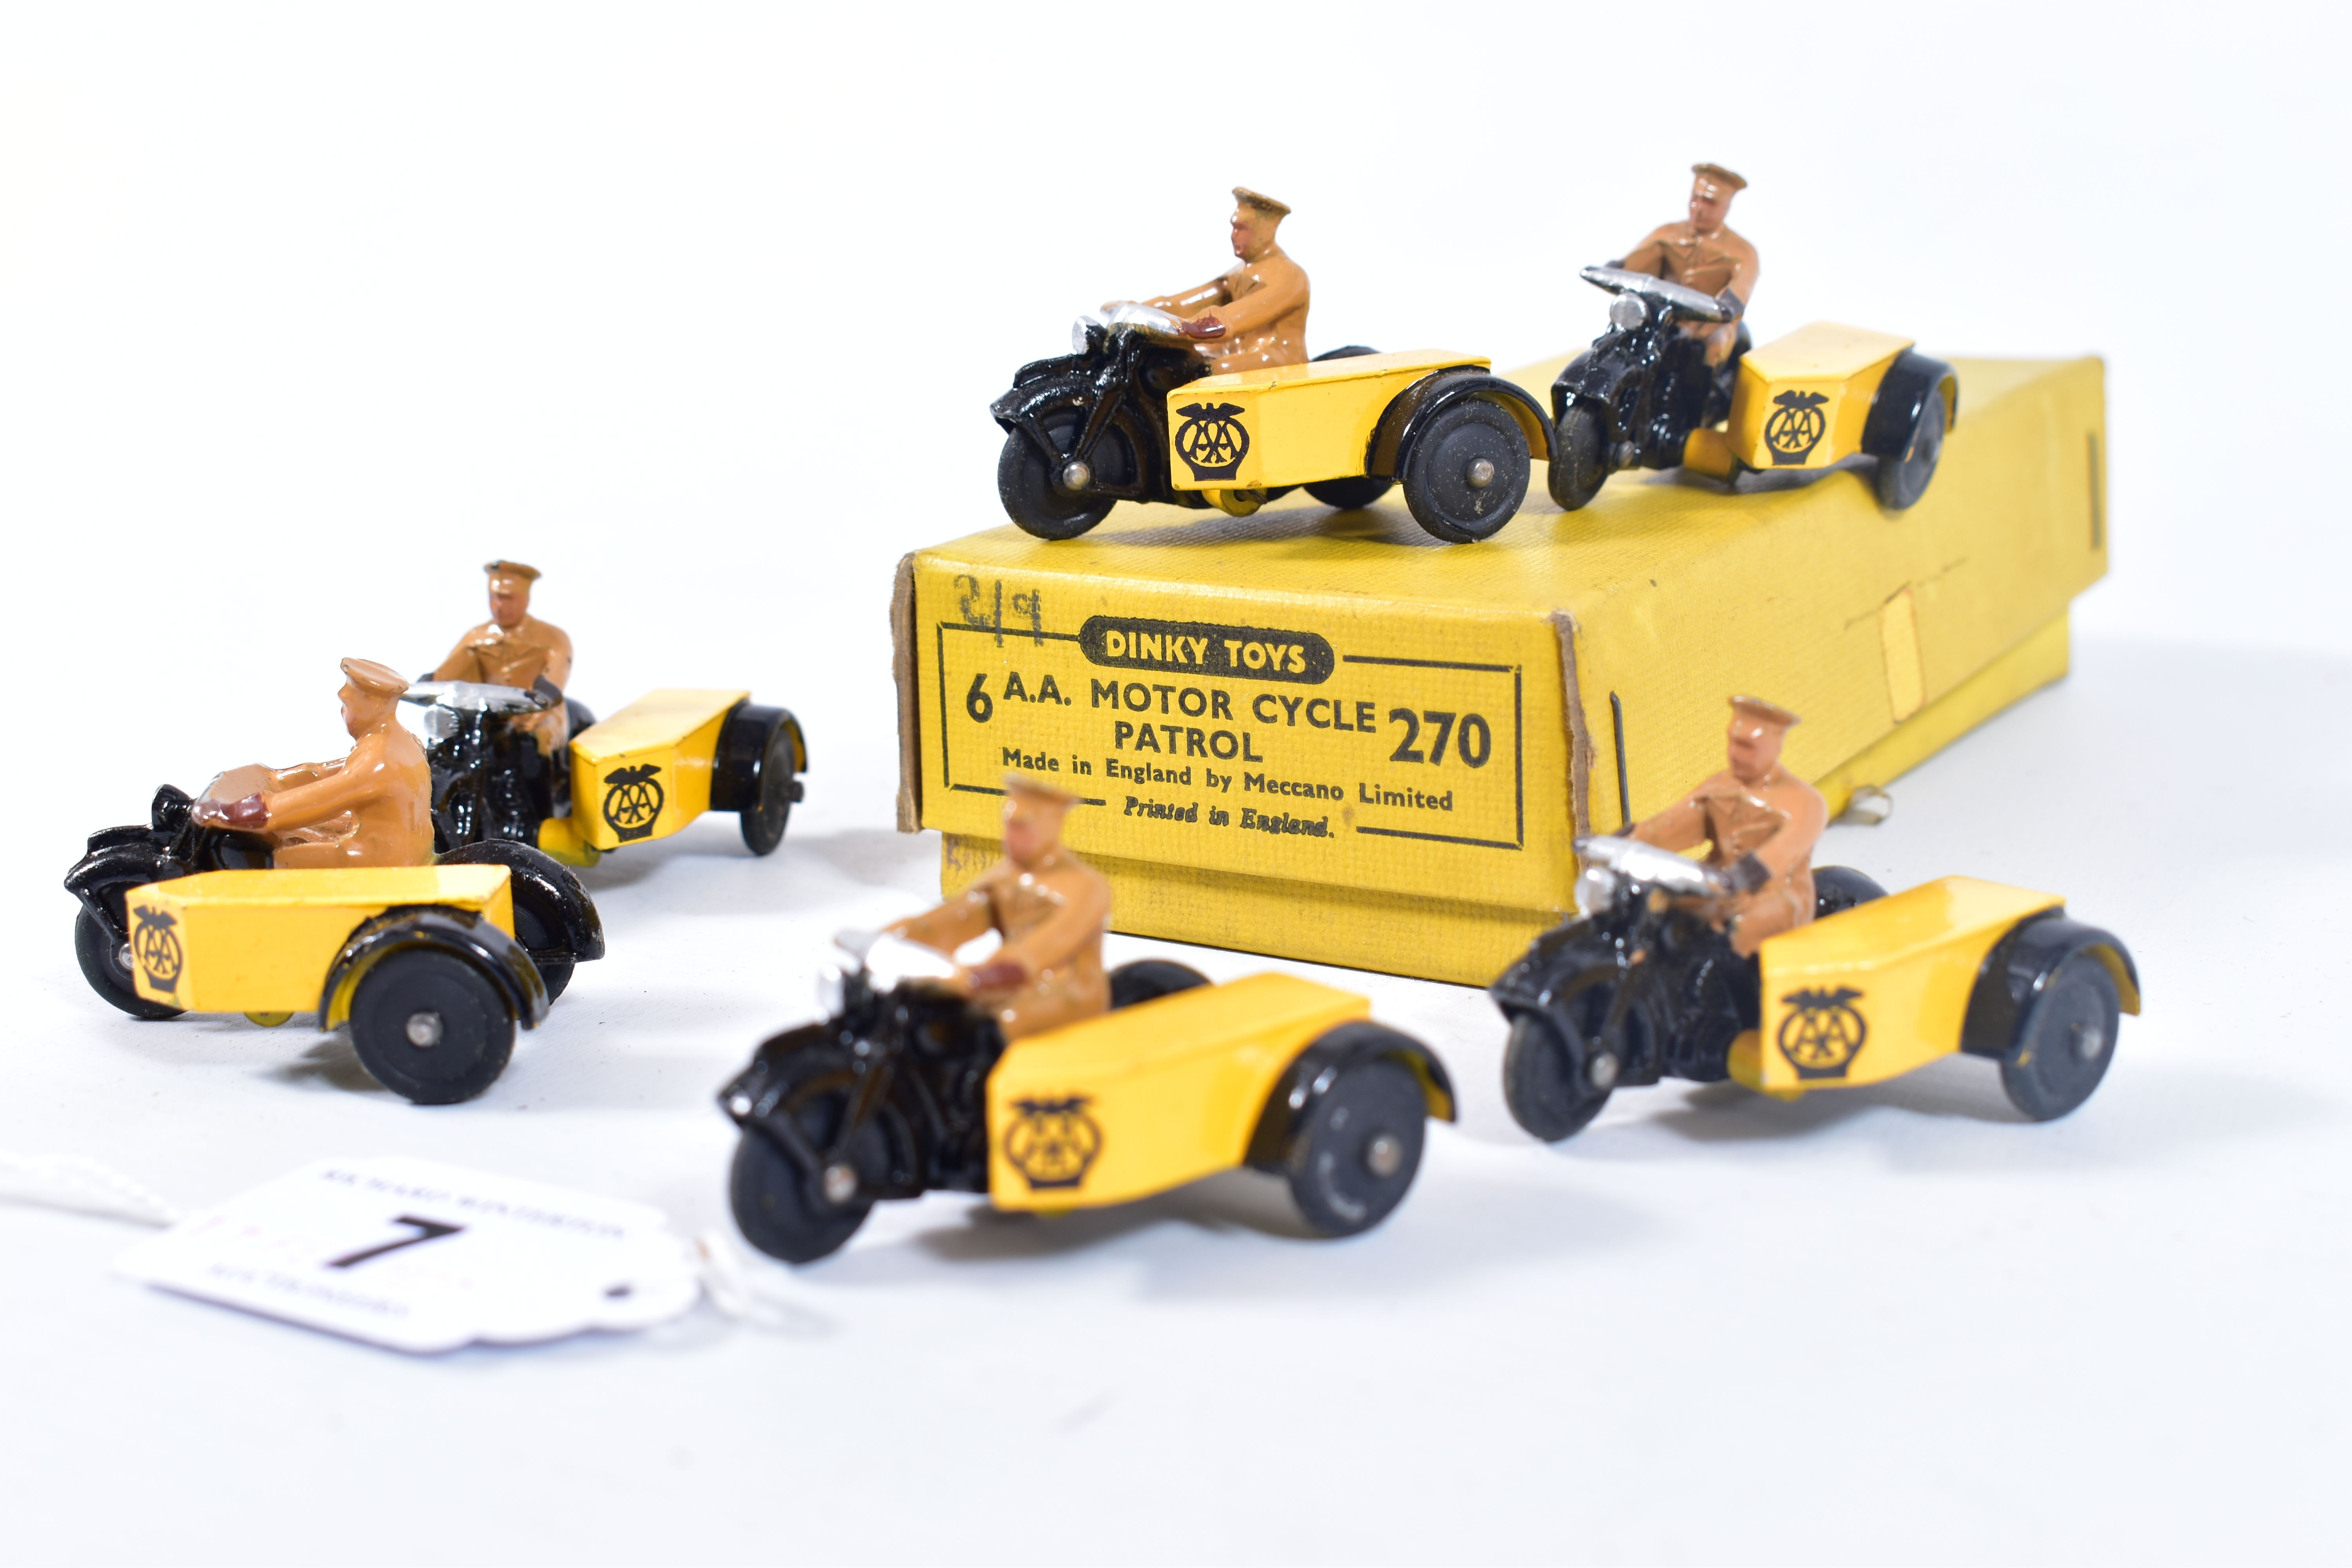 A DINKY TOYS TRADE BOX OF SIX A.A. MOTORCYCLE PATROL, No.270, complete with all six models in - Bild 4 aus 5